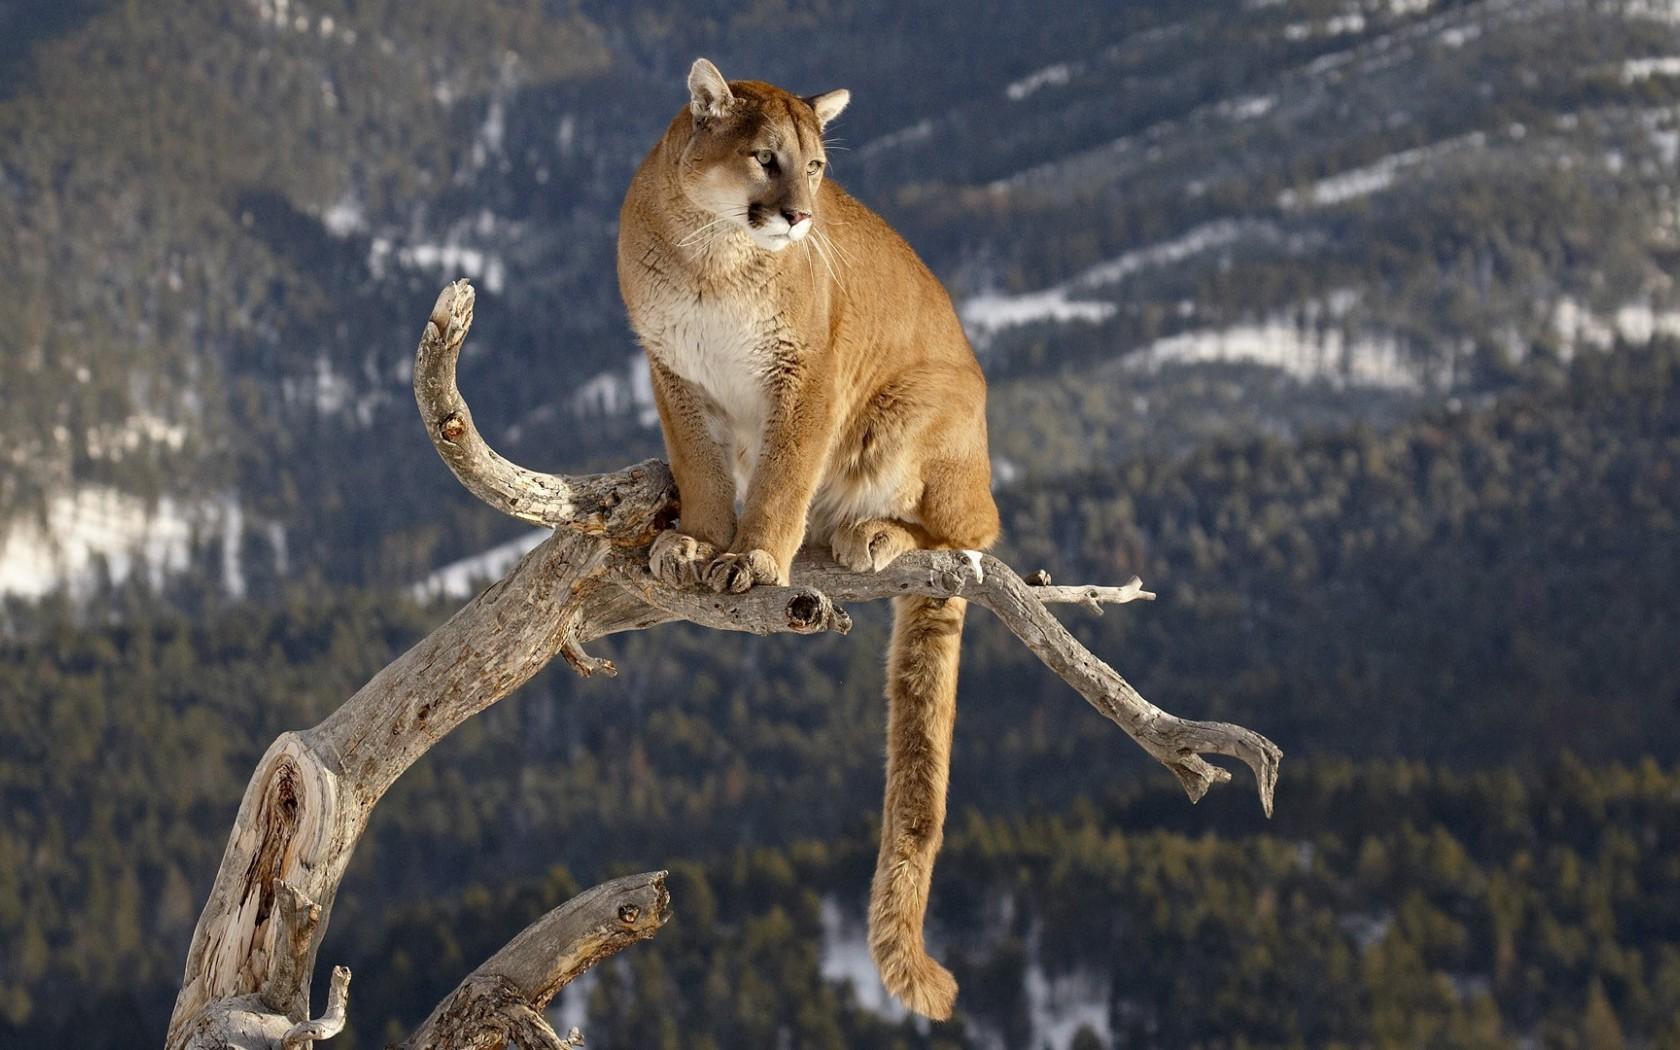 Mountain Lion Puma Cougar Panther Catamount - Cool Pictures Of Mountain Lion - HD Wallpaper 